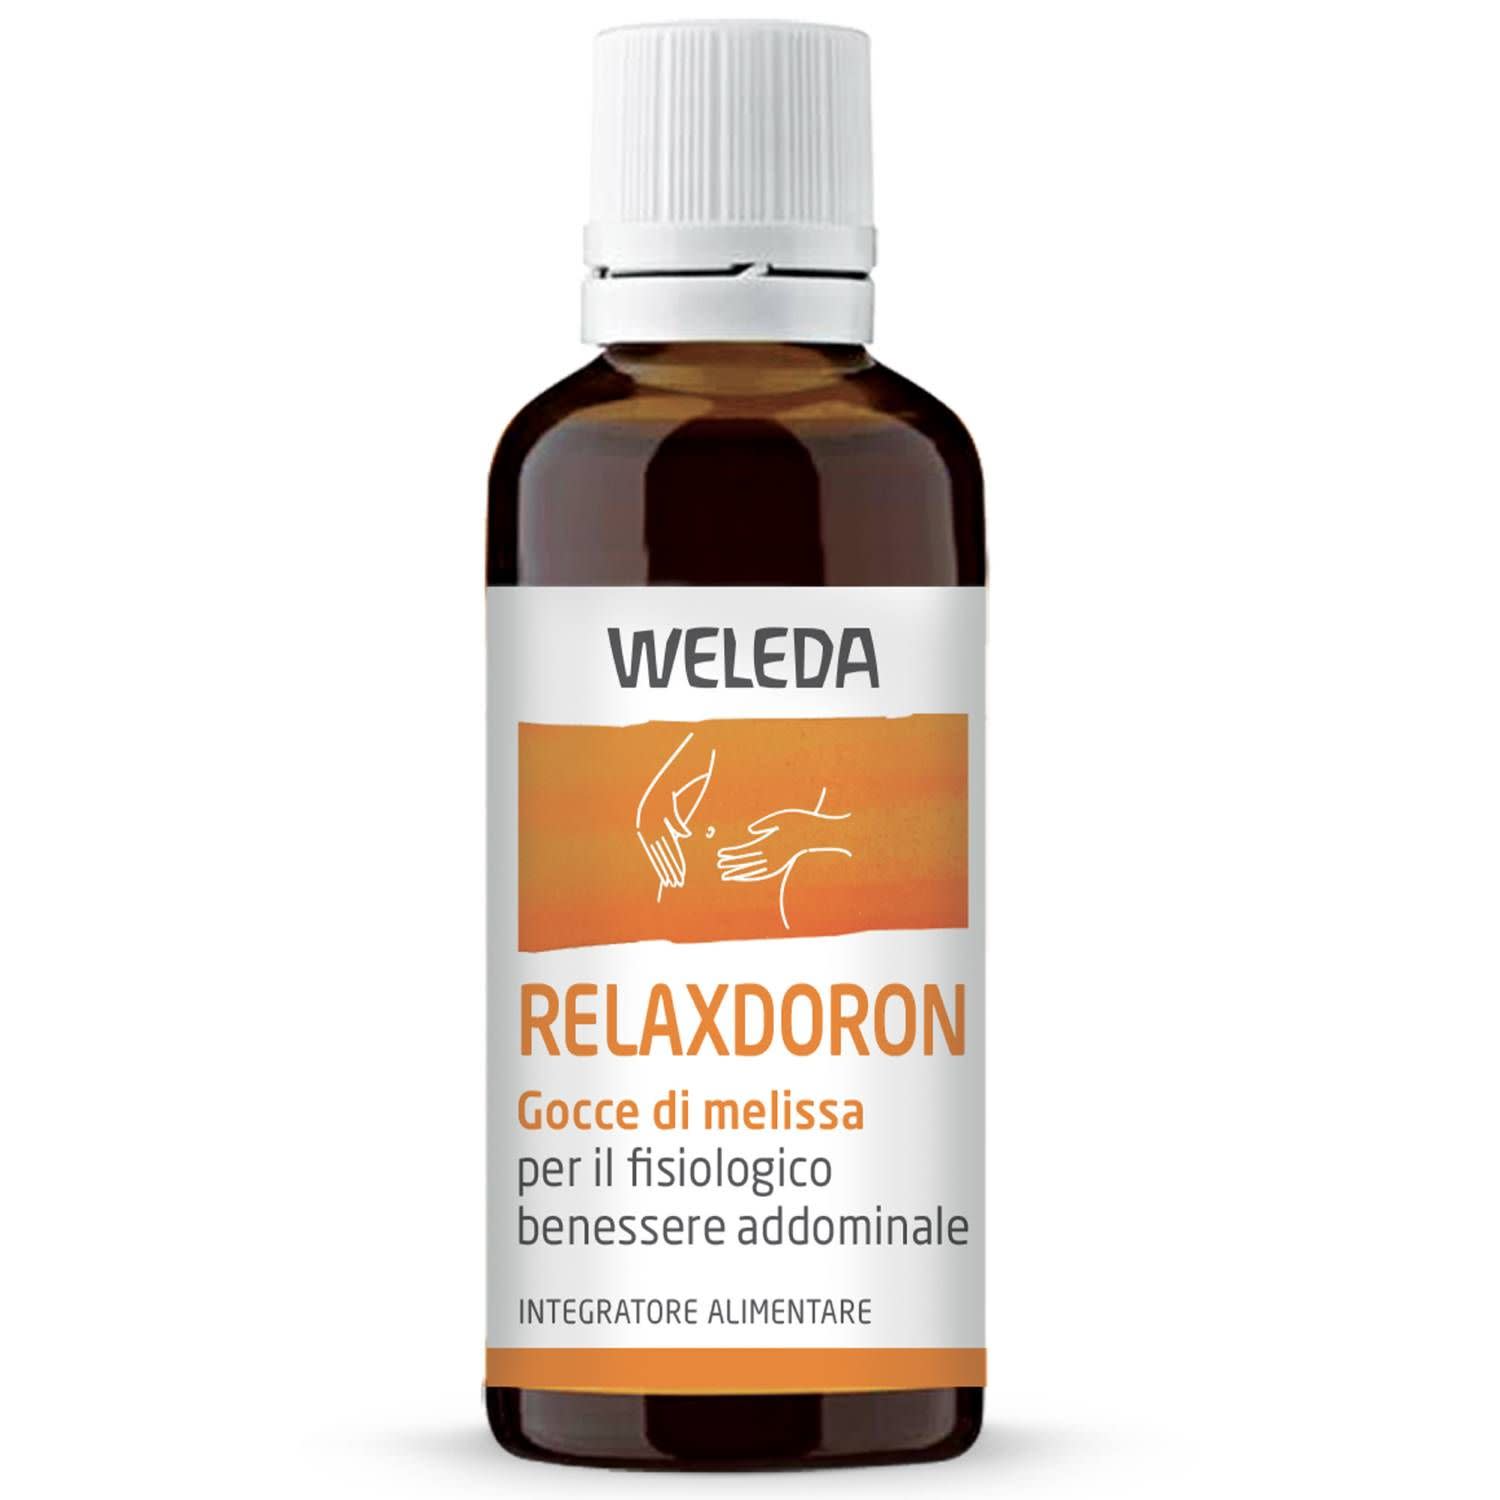 984774796 - Weleda Relaxodron Gocce di Melissa Relax gonfiore addome 50ml - 4741141_3.jpg